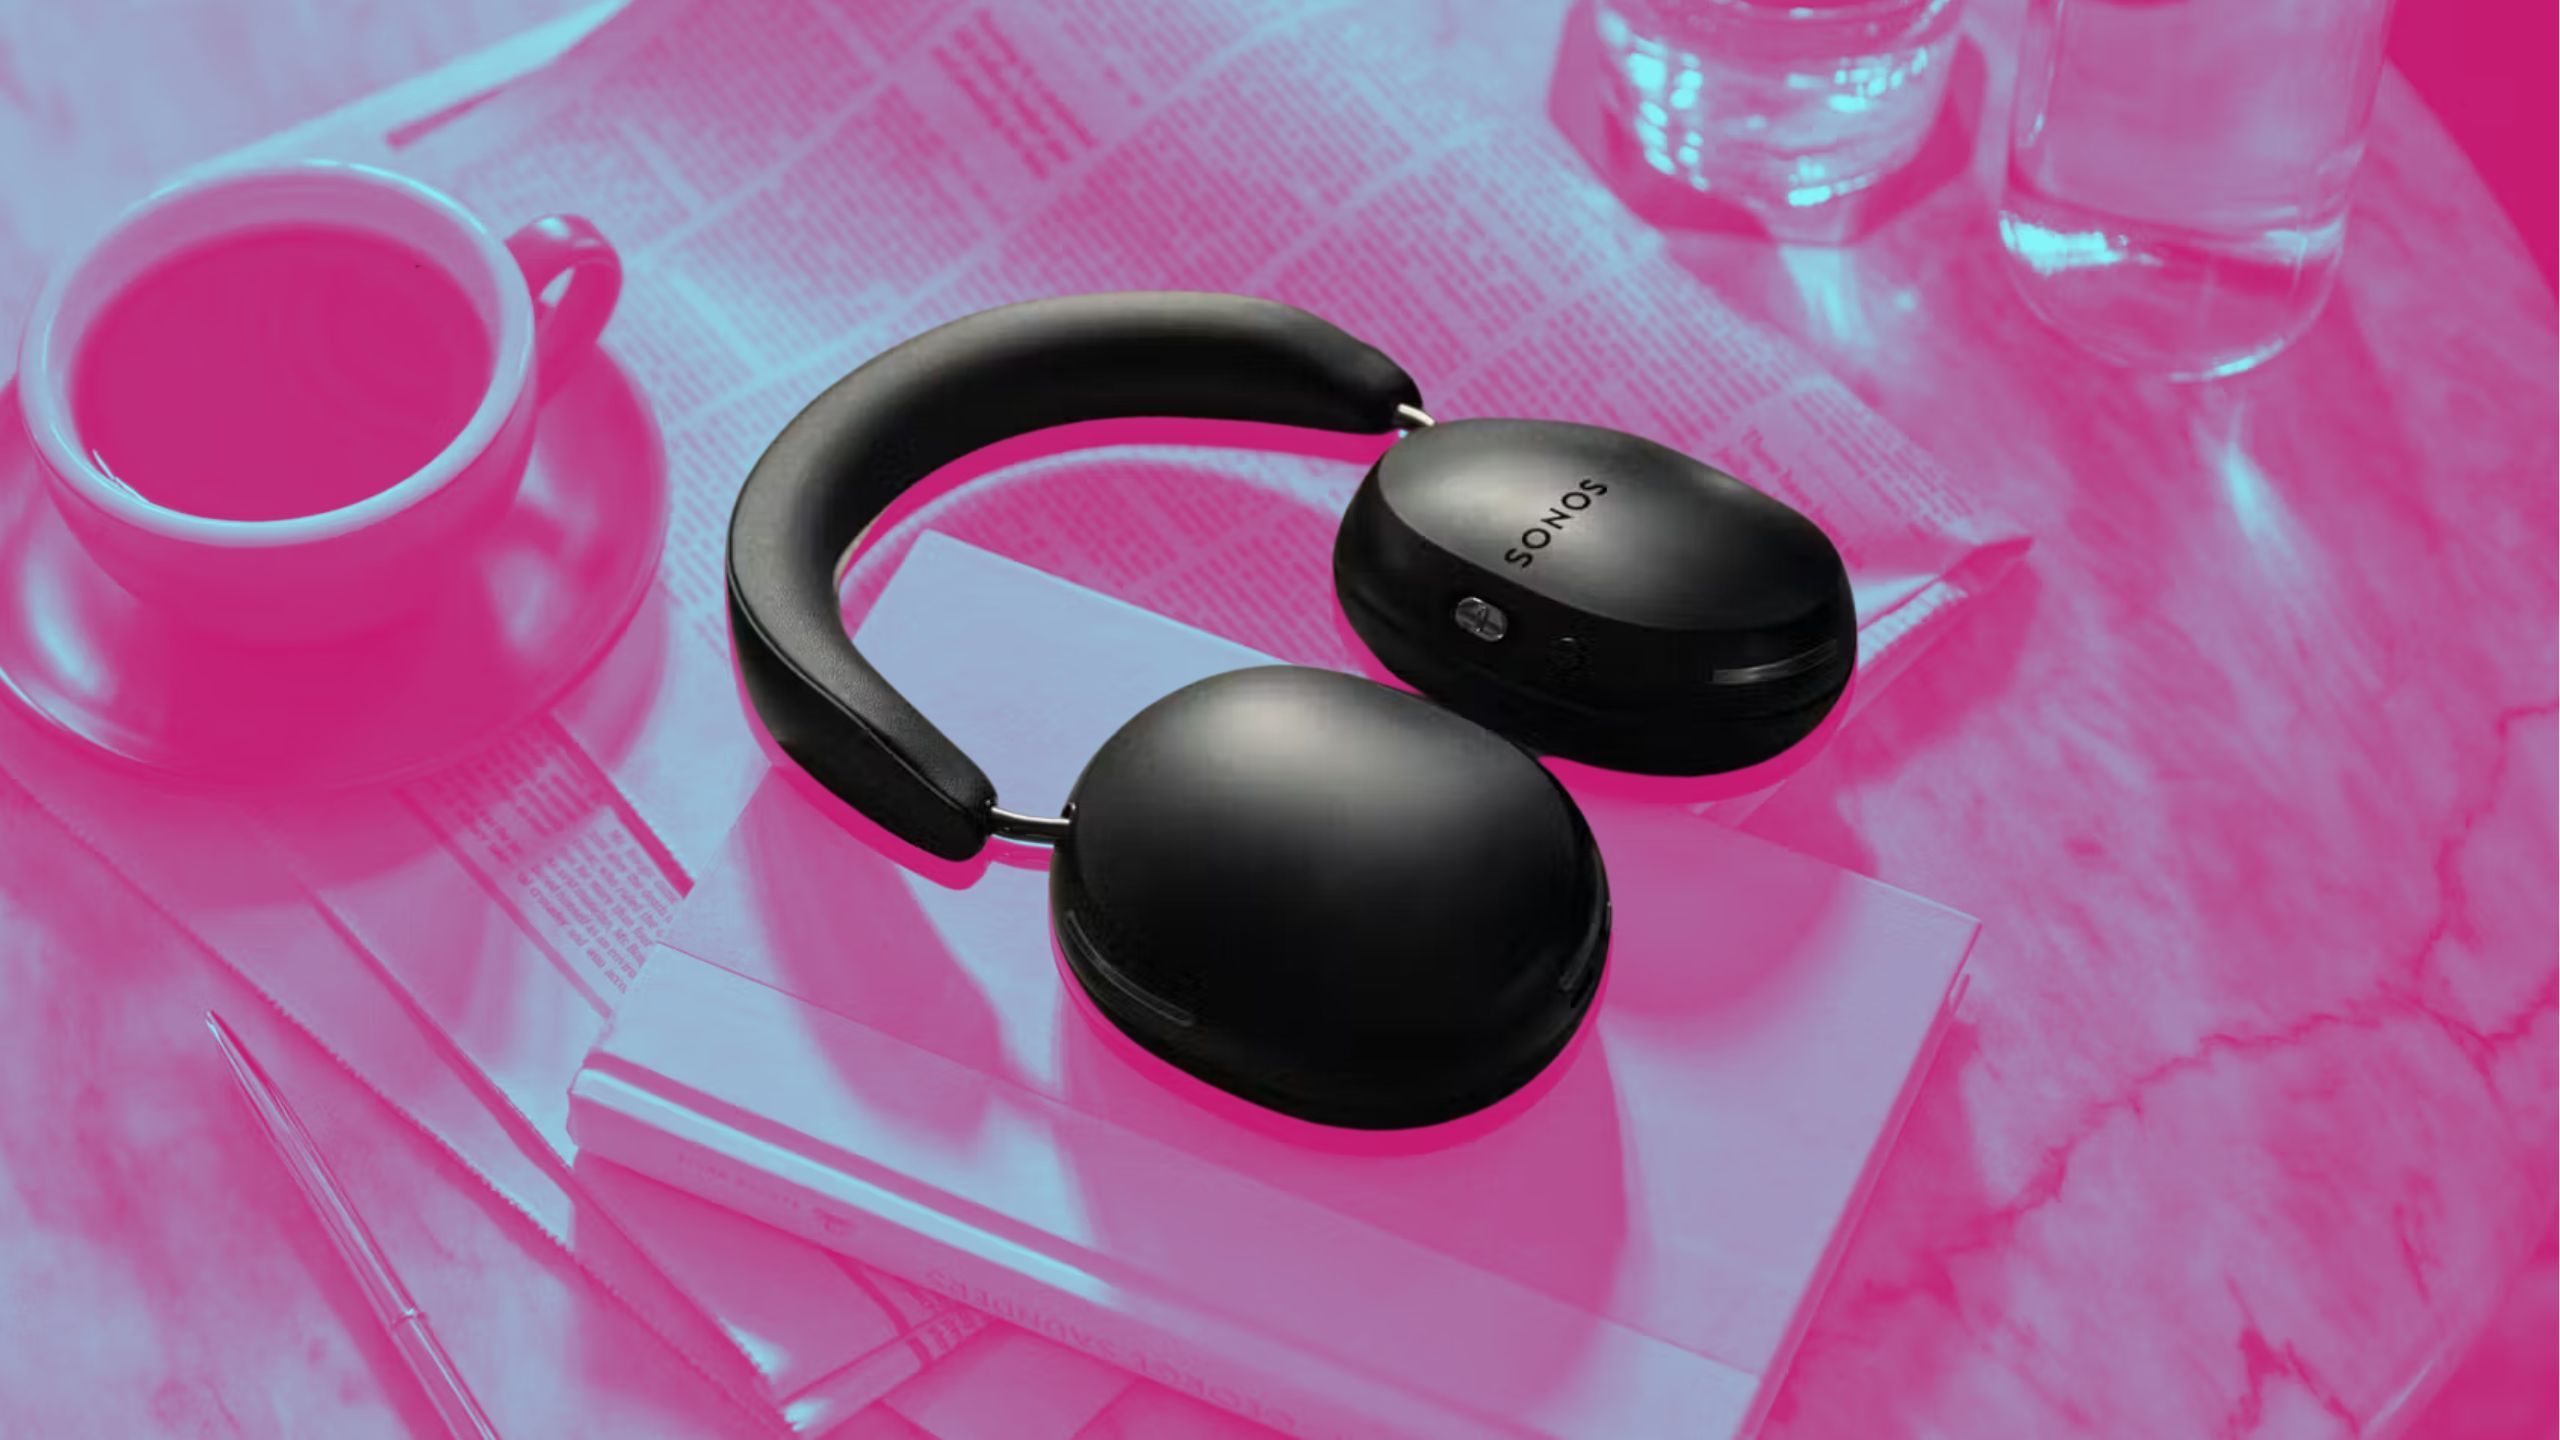 The Sonos Ace headphones are officially coming June 5th